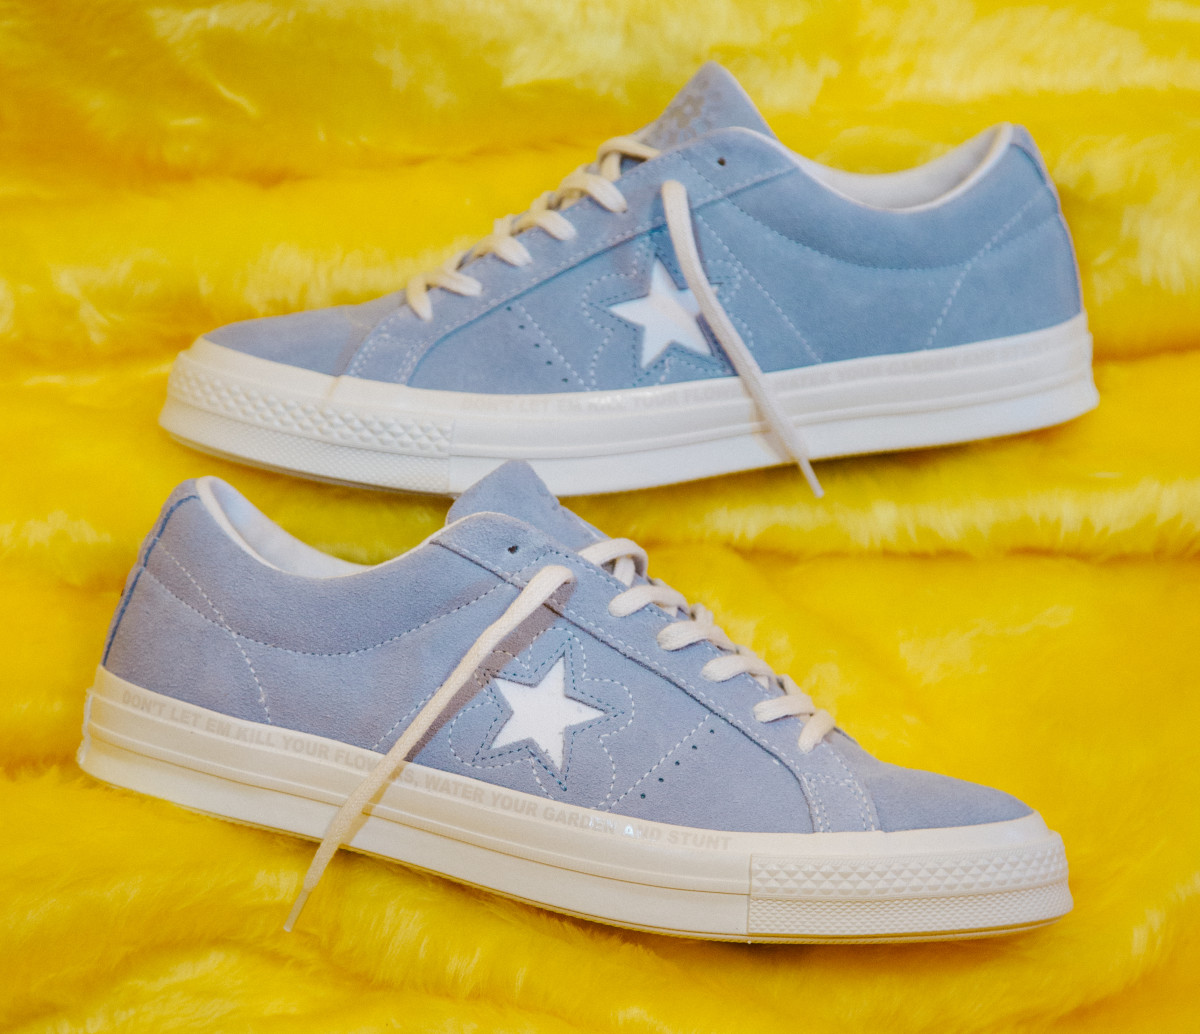 tyler the creator shoes one star